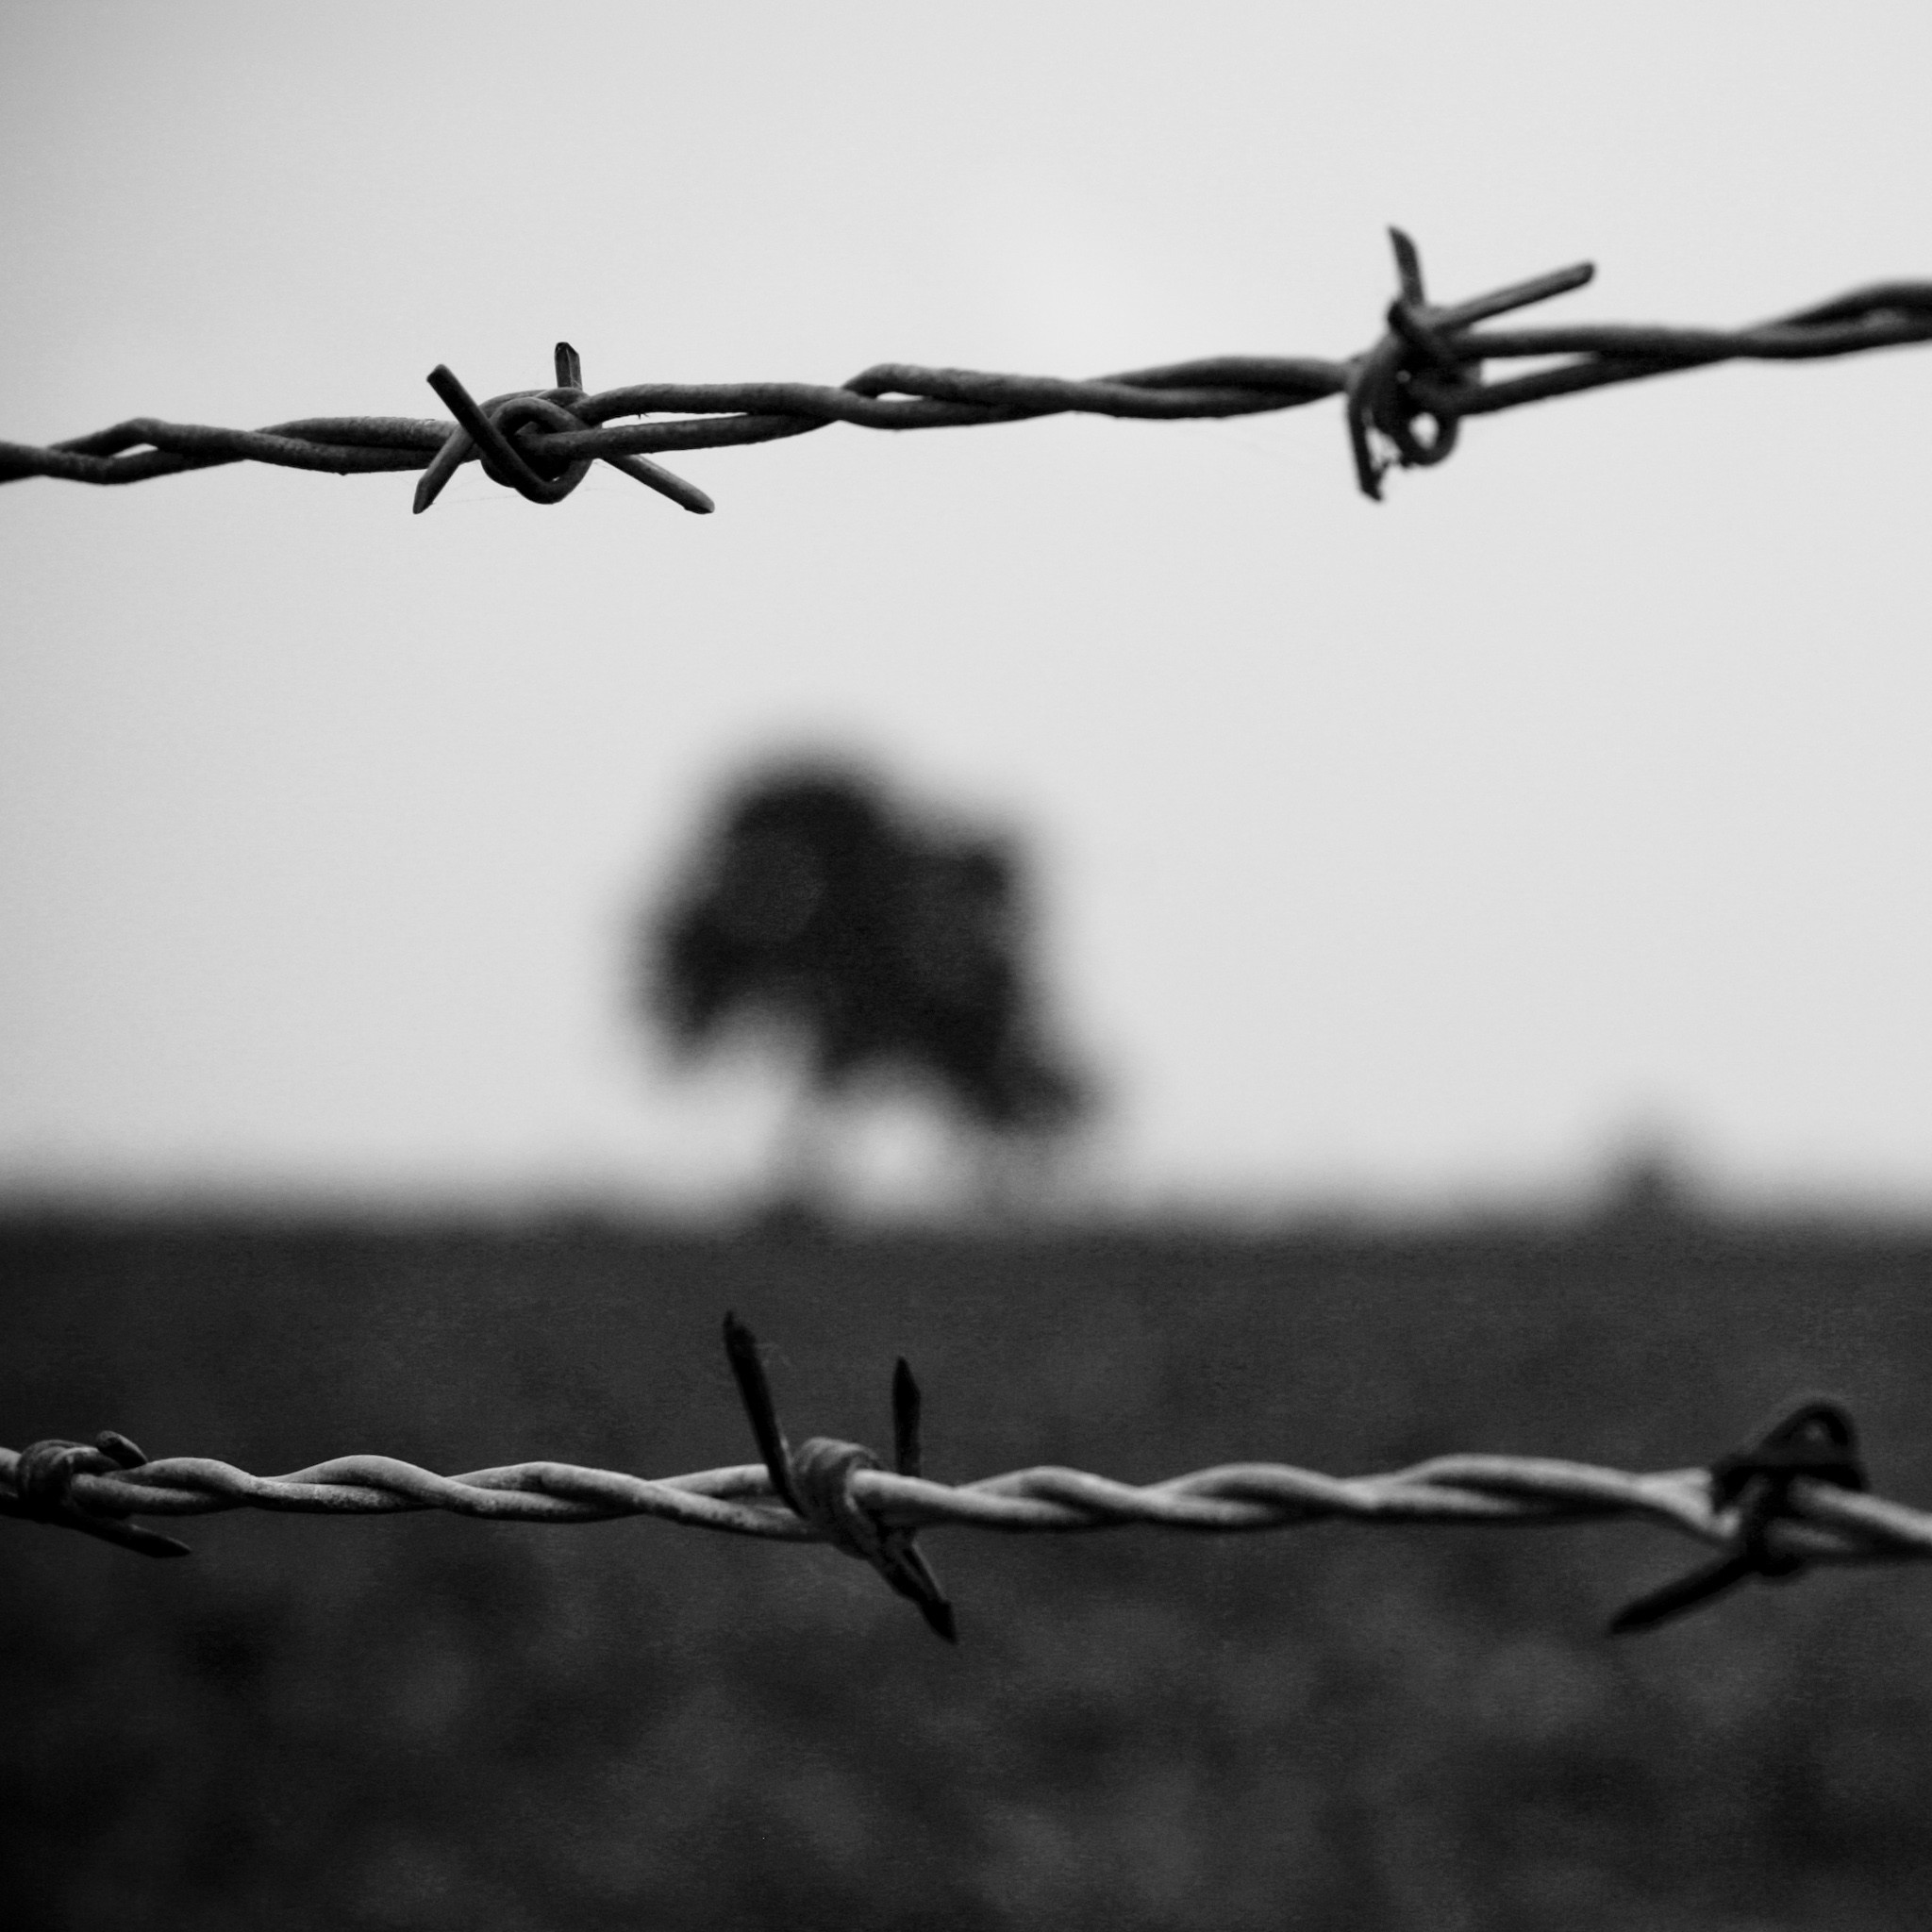 Barb Wire Wallpaper ·① WallpaperTag